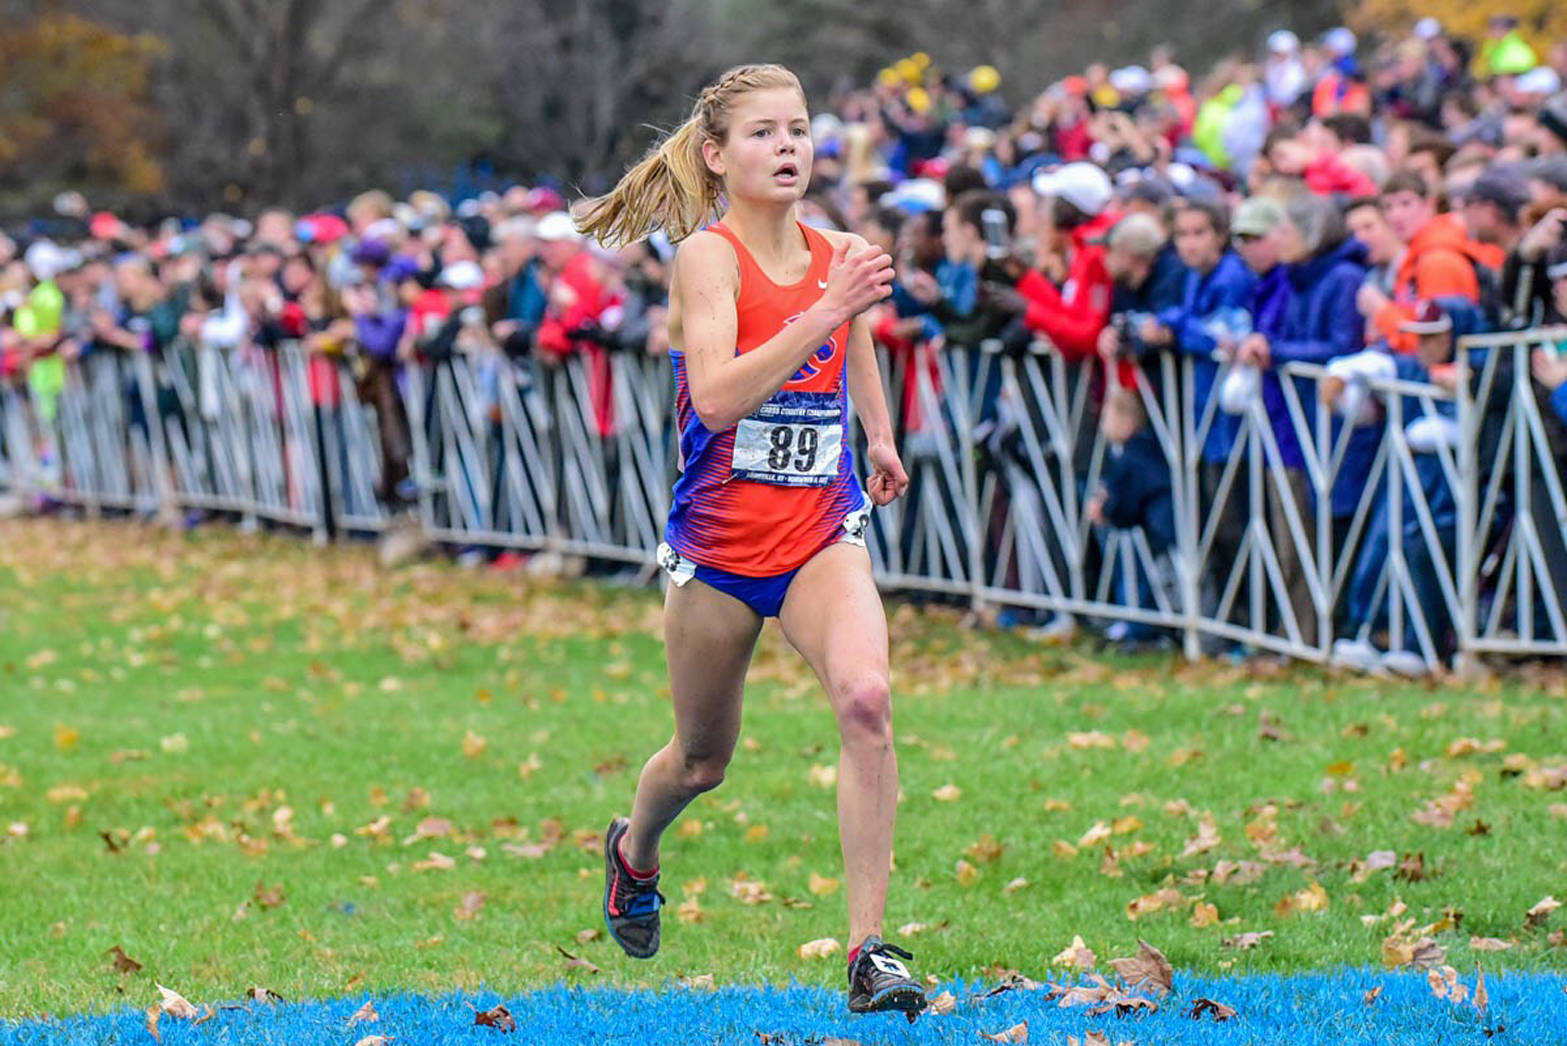 Boise State redshirt sophomore Allie Ostrander runs to fourth place at the NCAA cross-country championships Saturday, Nov. 18, 2017, in Louisville, Kentucky. (Photo provided by Michael Scott)